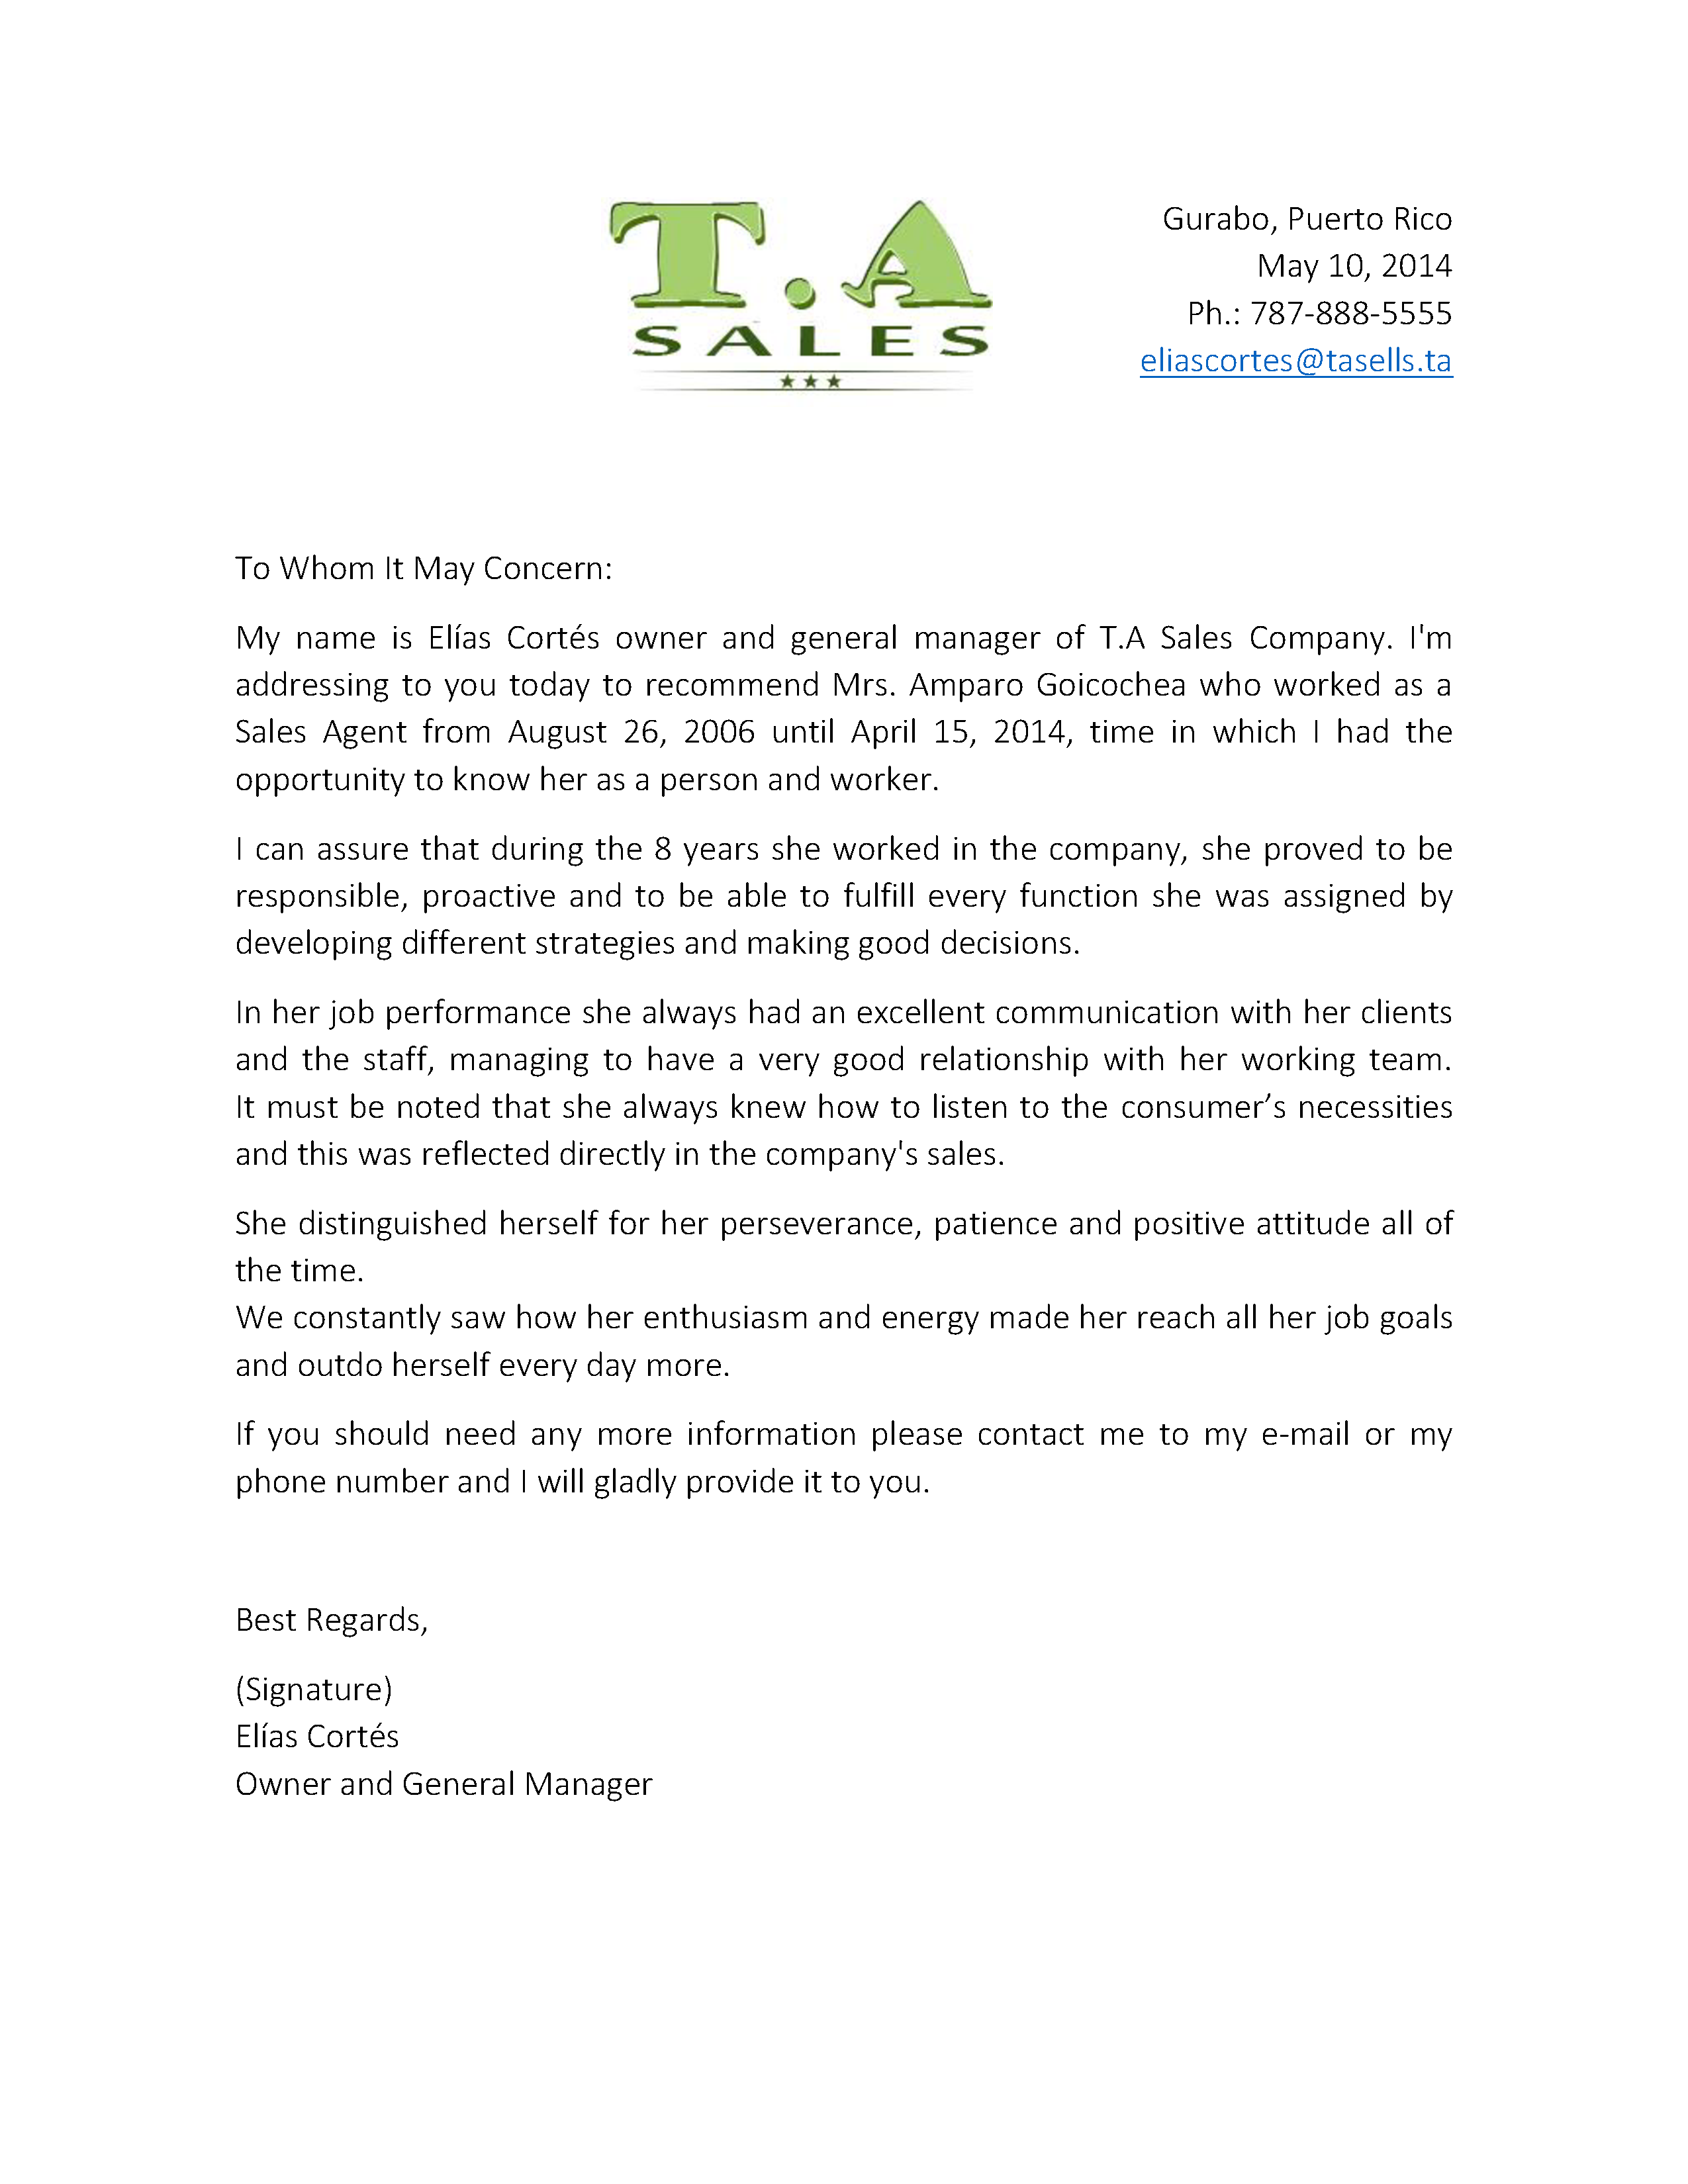 Sales Agent Sample of Recommendation Letter Job 2 Grow